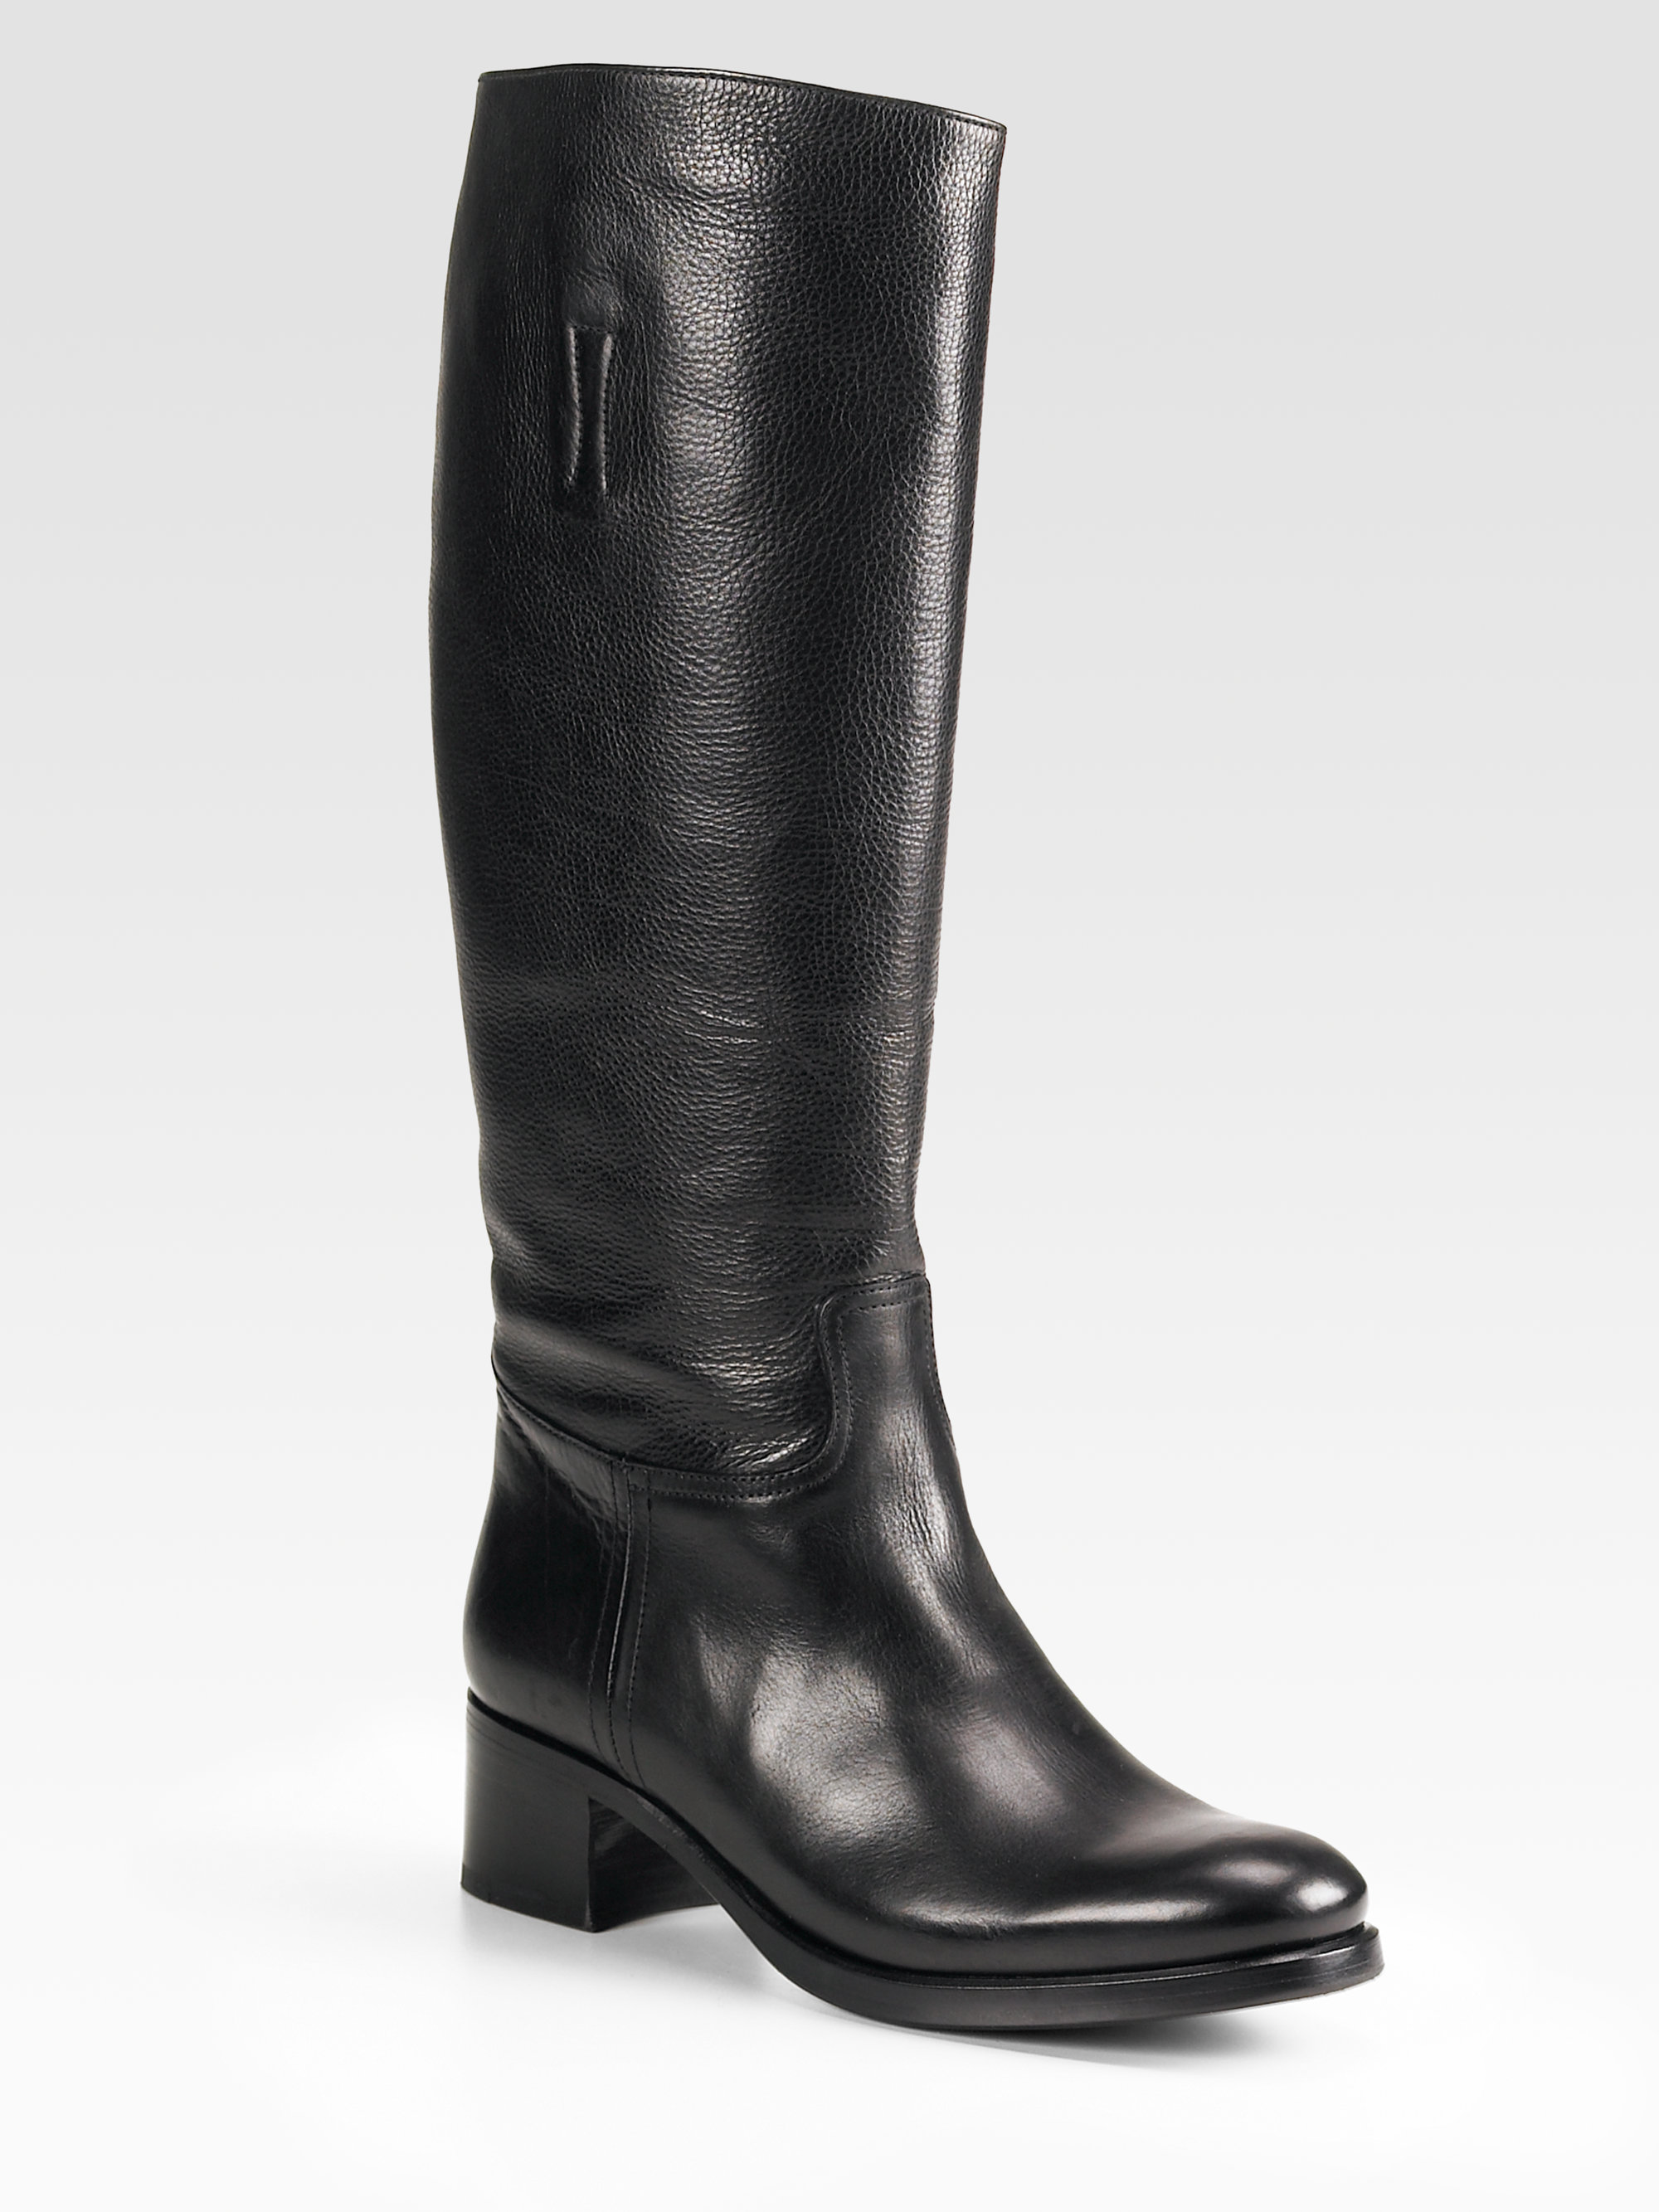 Prada Tall Leather Boots in Black | Lyst